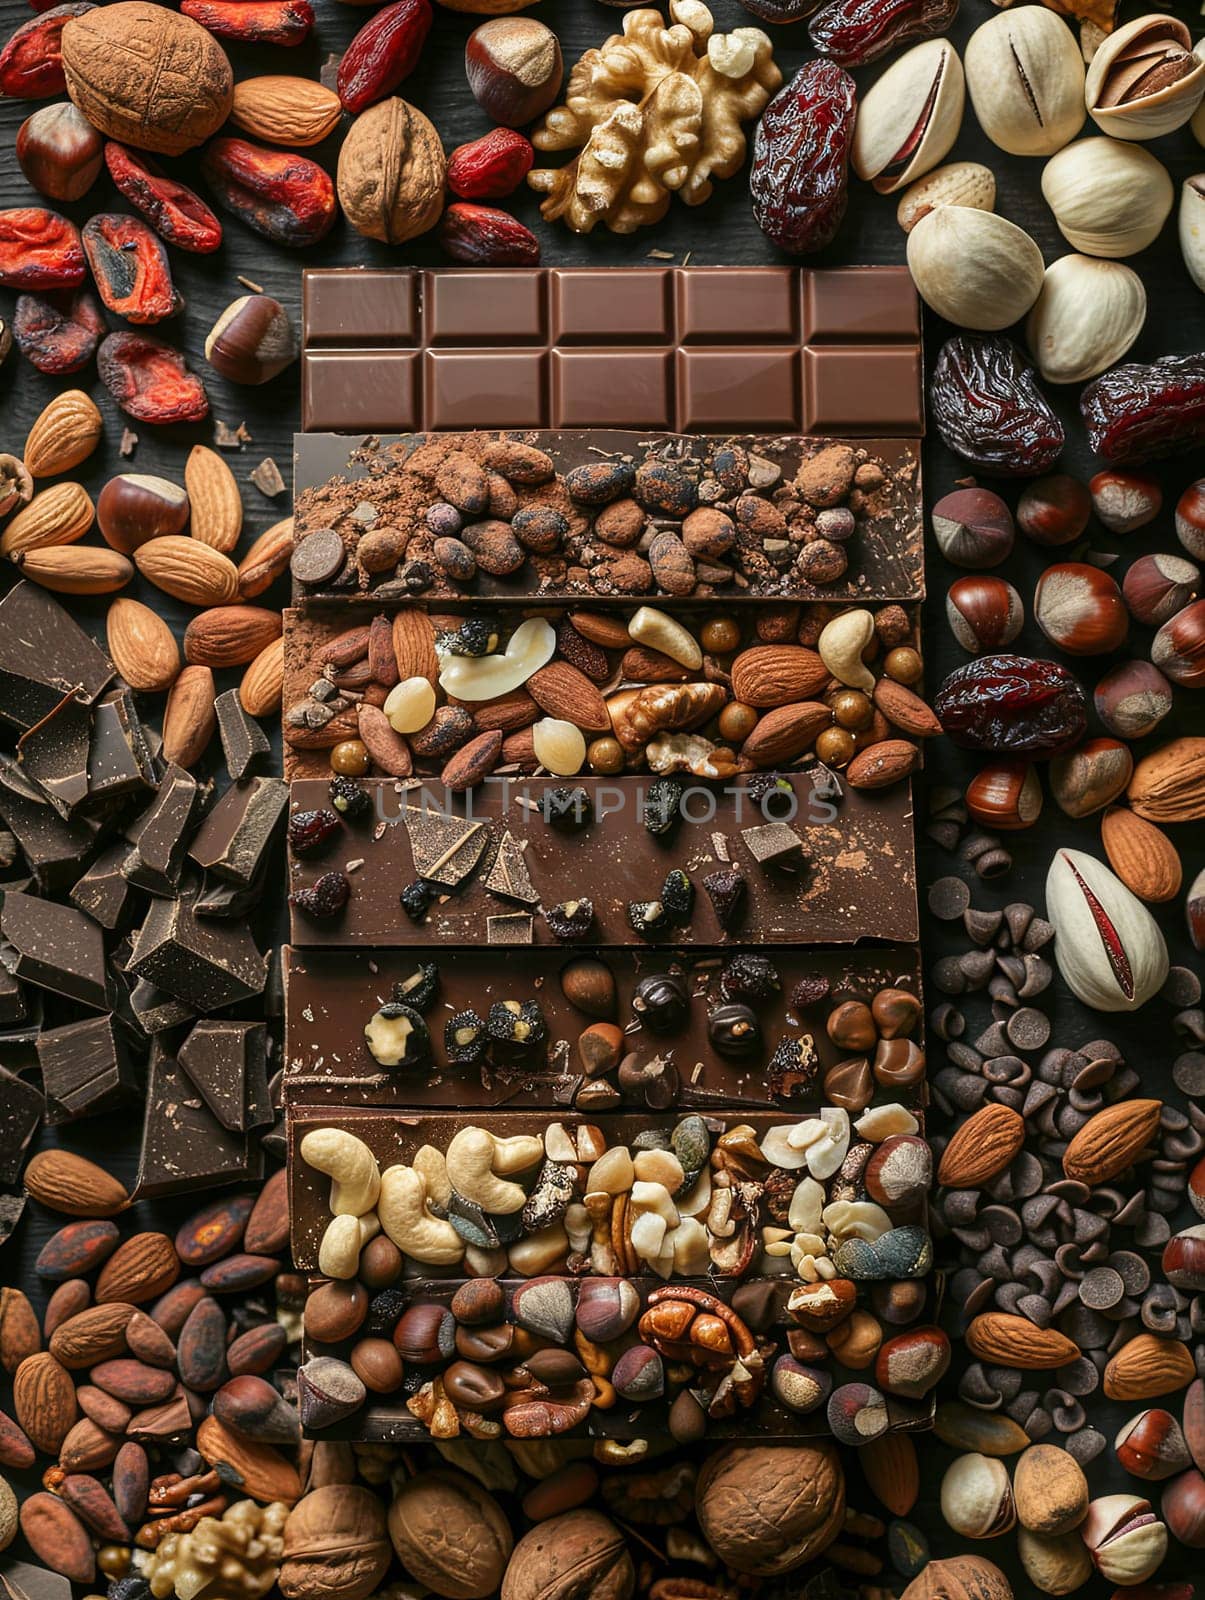 A rich chocolate bar is surrounded by a variety of nuts and chocolate pieces, creating a decadent and appetizing display.